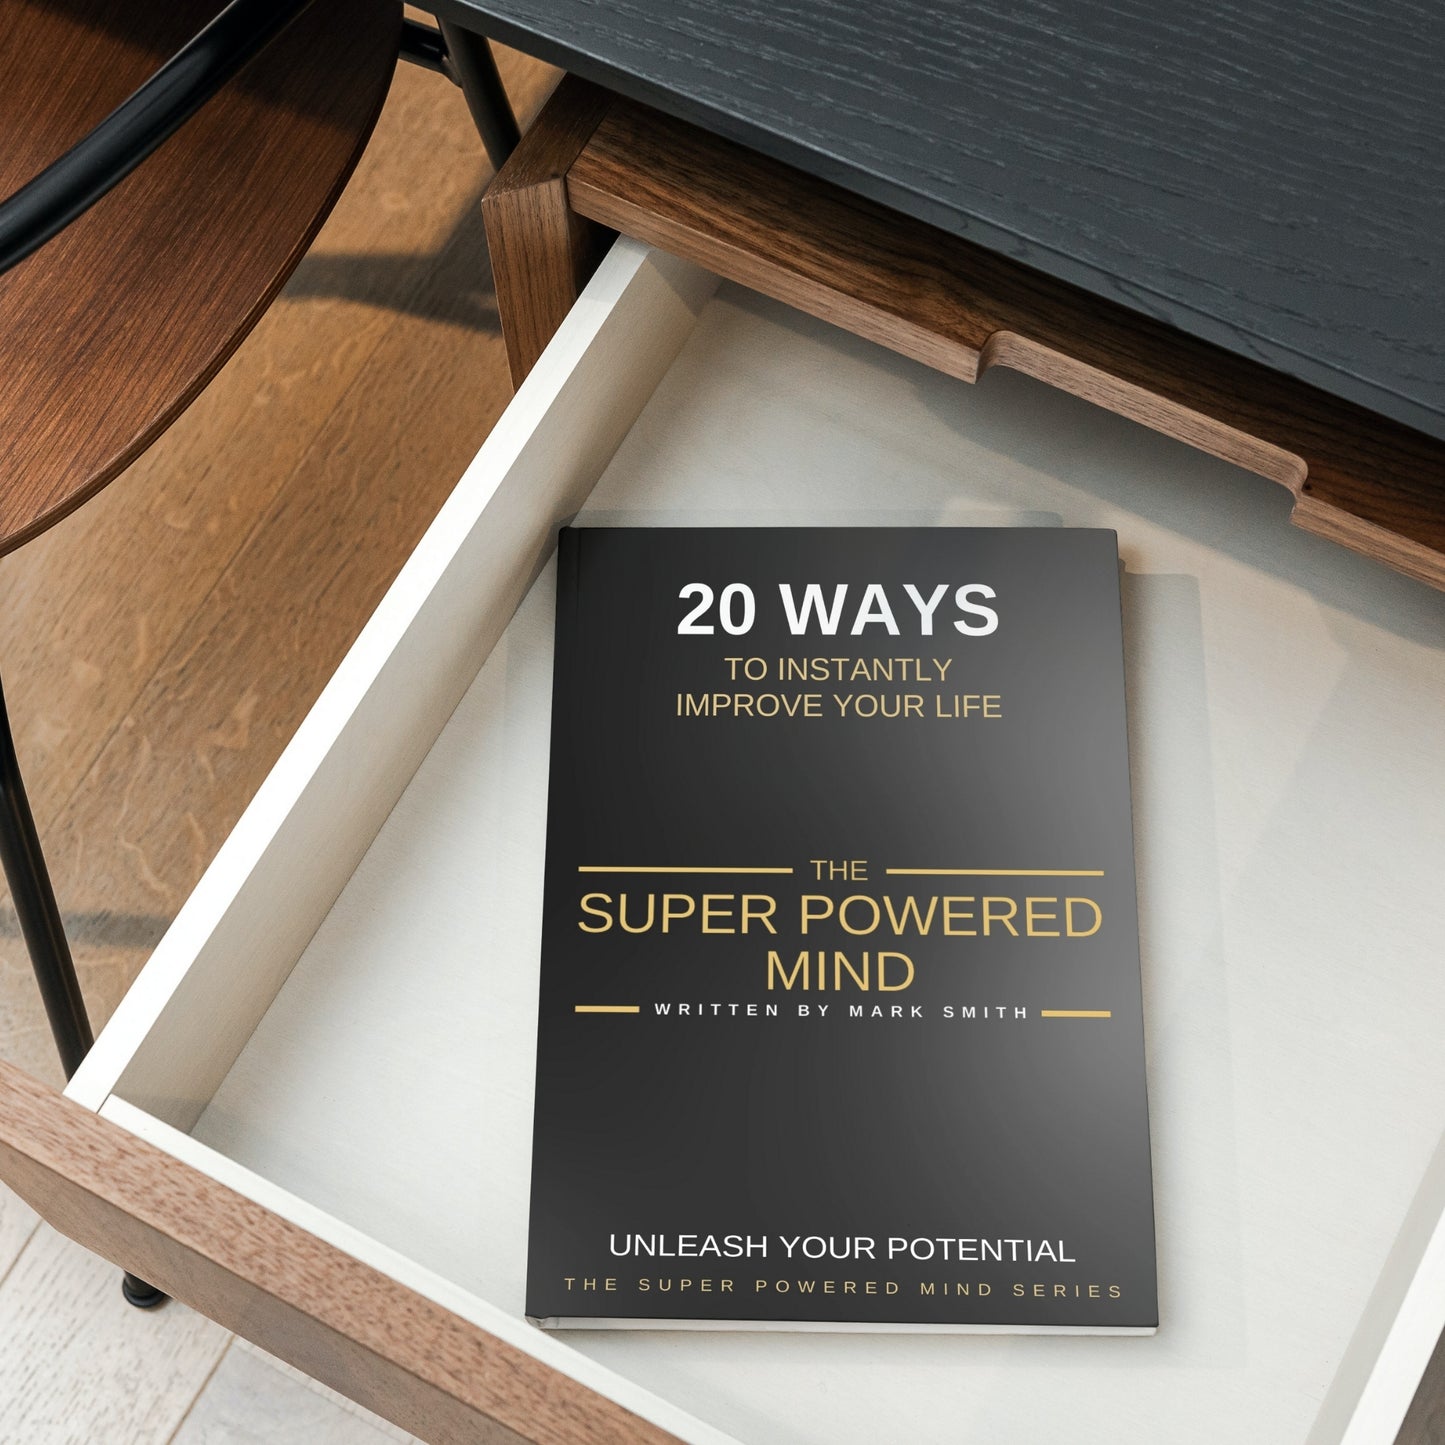 The Super Powered Mind Series: Book 2 - 20 Ways To Instantly Improve Your Life - Written by Mark Smith (Digital Download eBook)